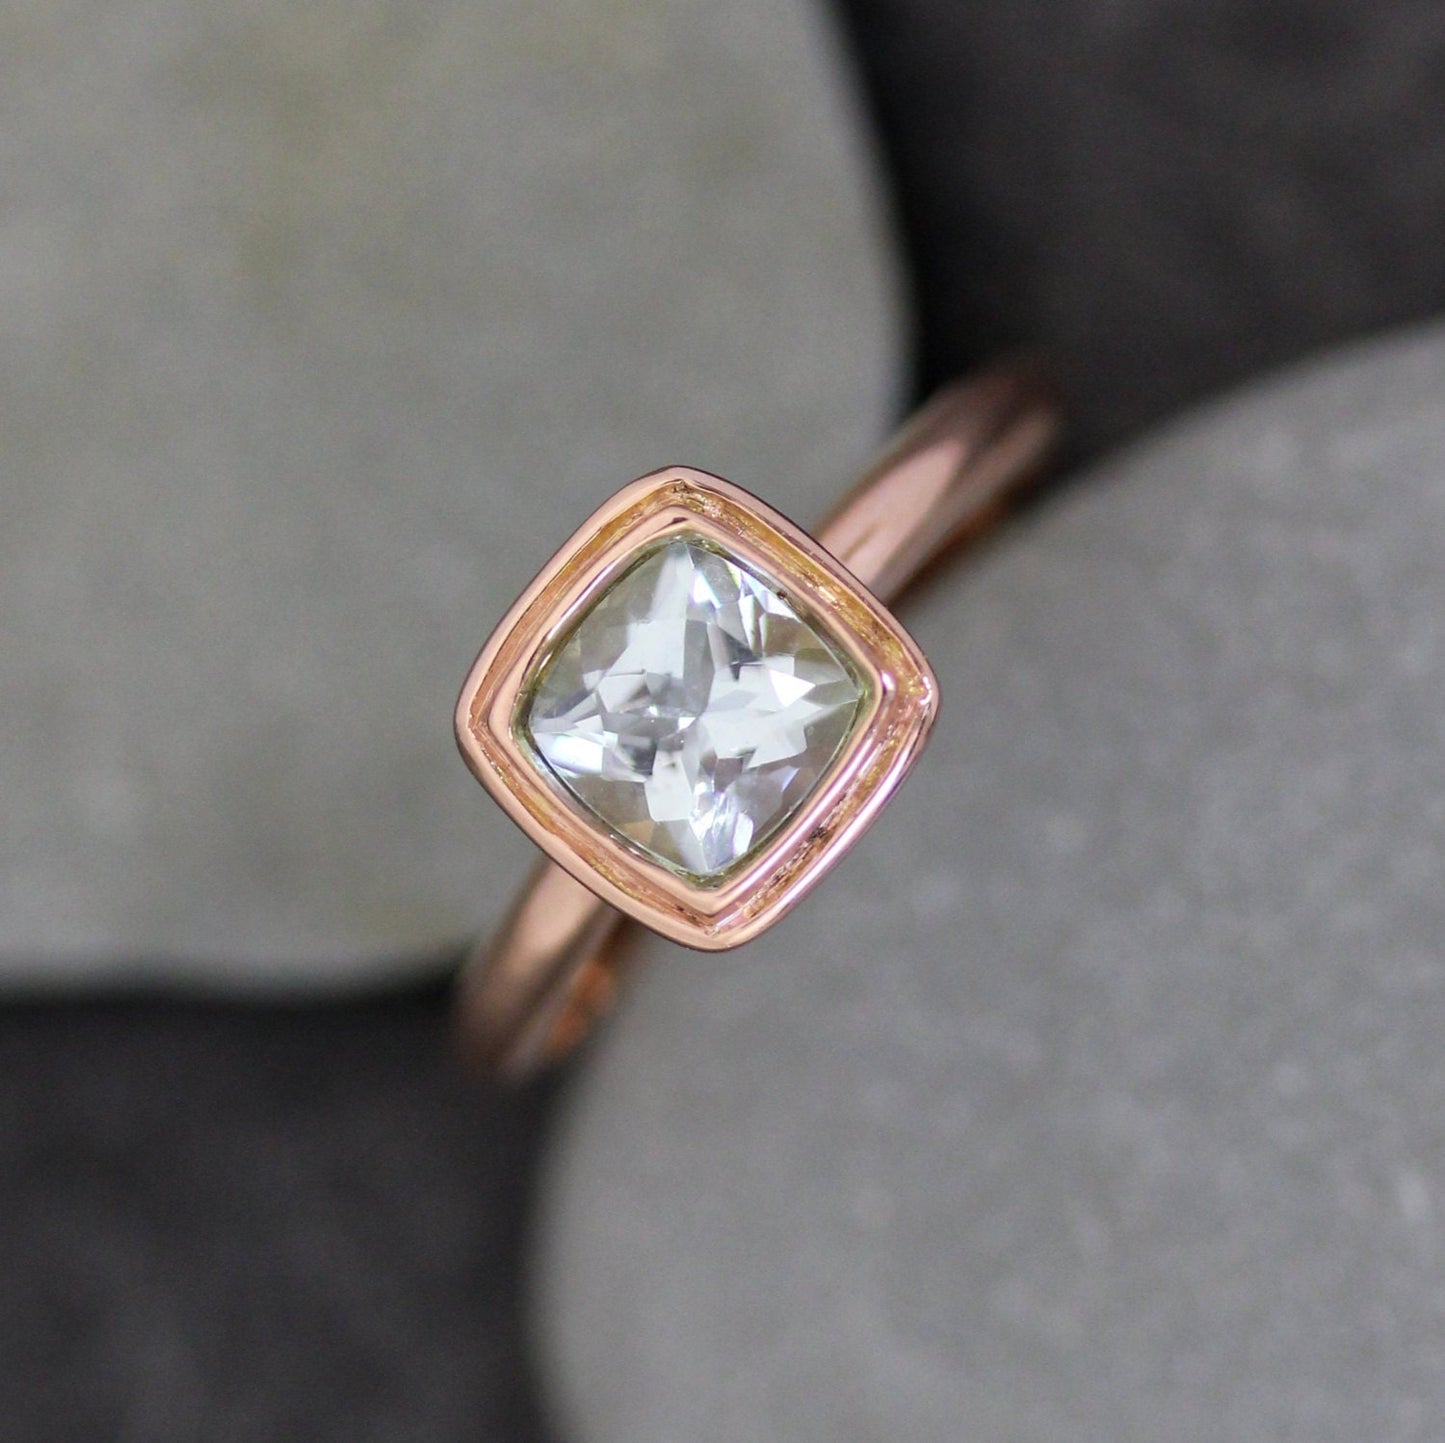 Cassin Jewelry's handmade Soft Blue Aquamarine Halo Ring in Recycled 14k Rose Gold with a white topaz stone.